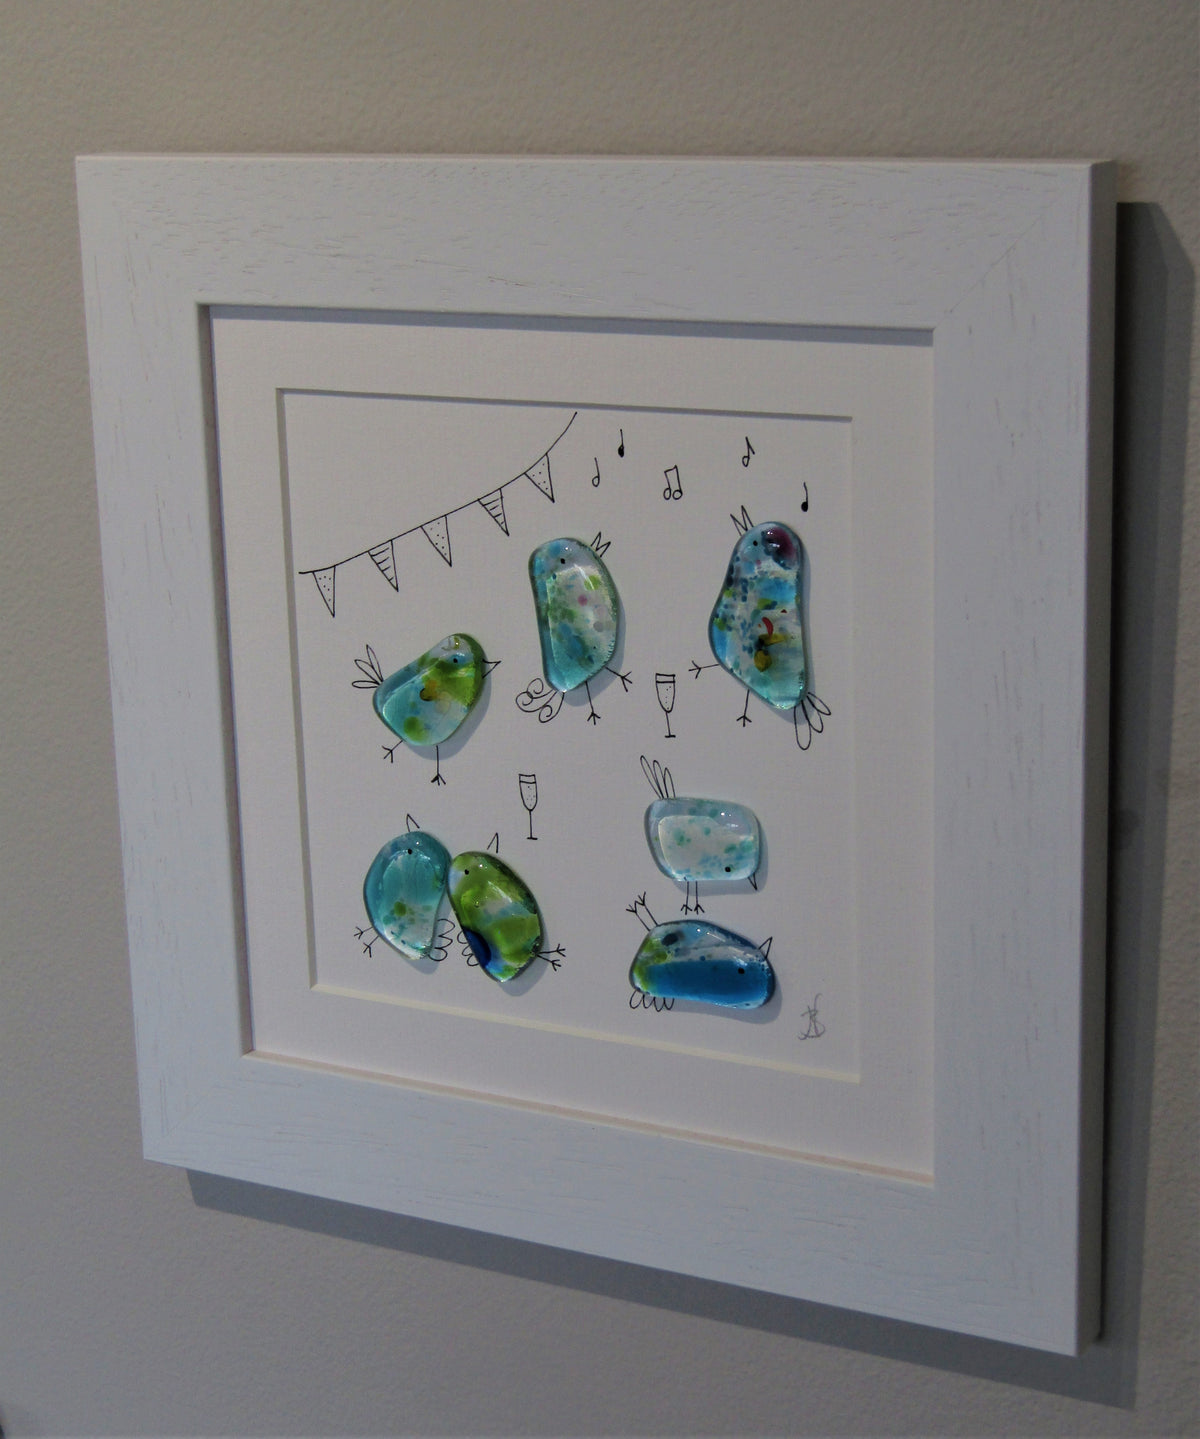 Niko Brown - Image and Fused Glass